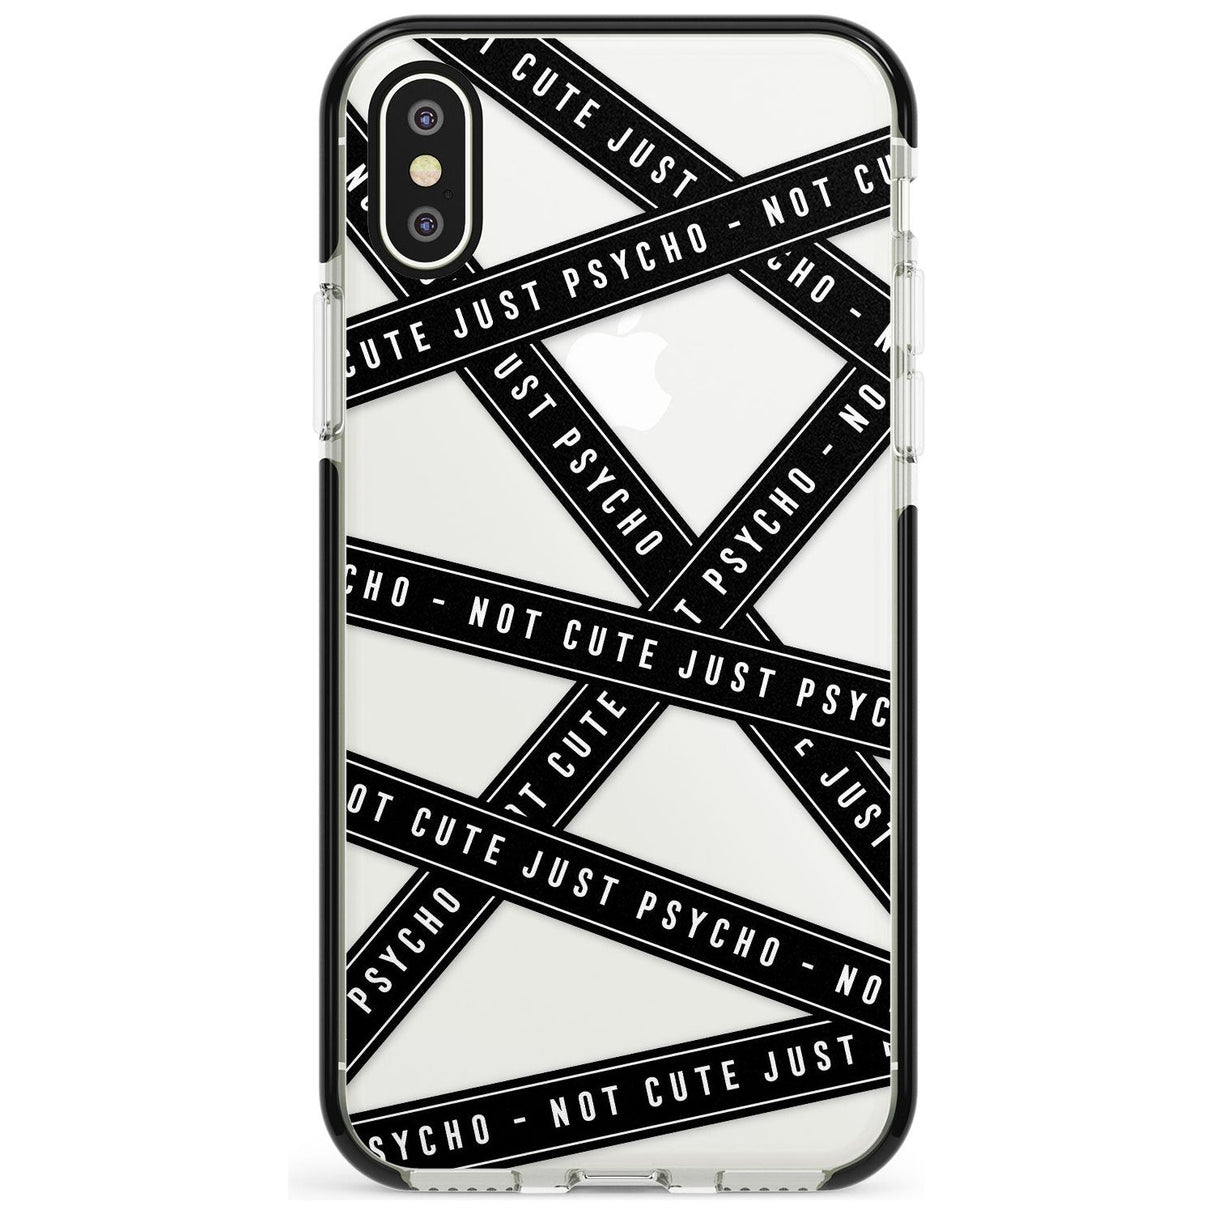 Caution Tape (Clear) Not Cute Just Psycho Black Impact Phone Case for iPhone X XS Max XR